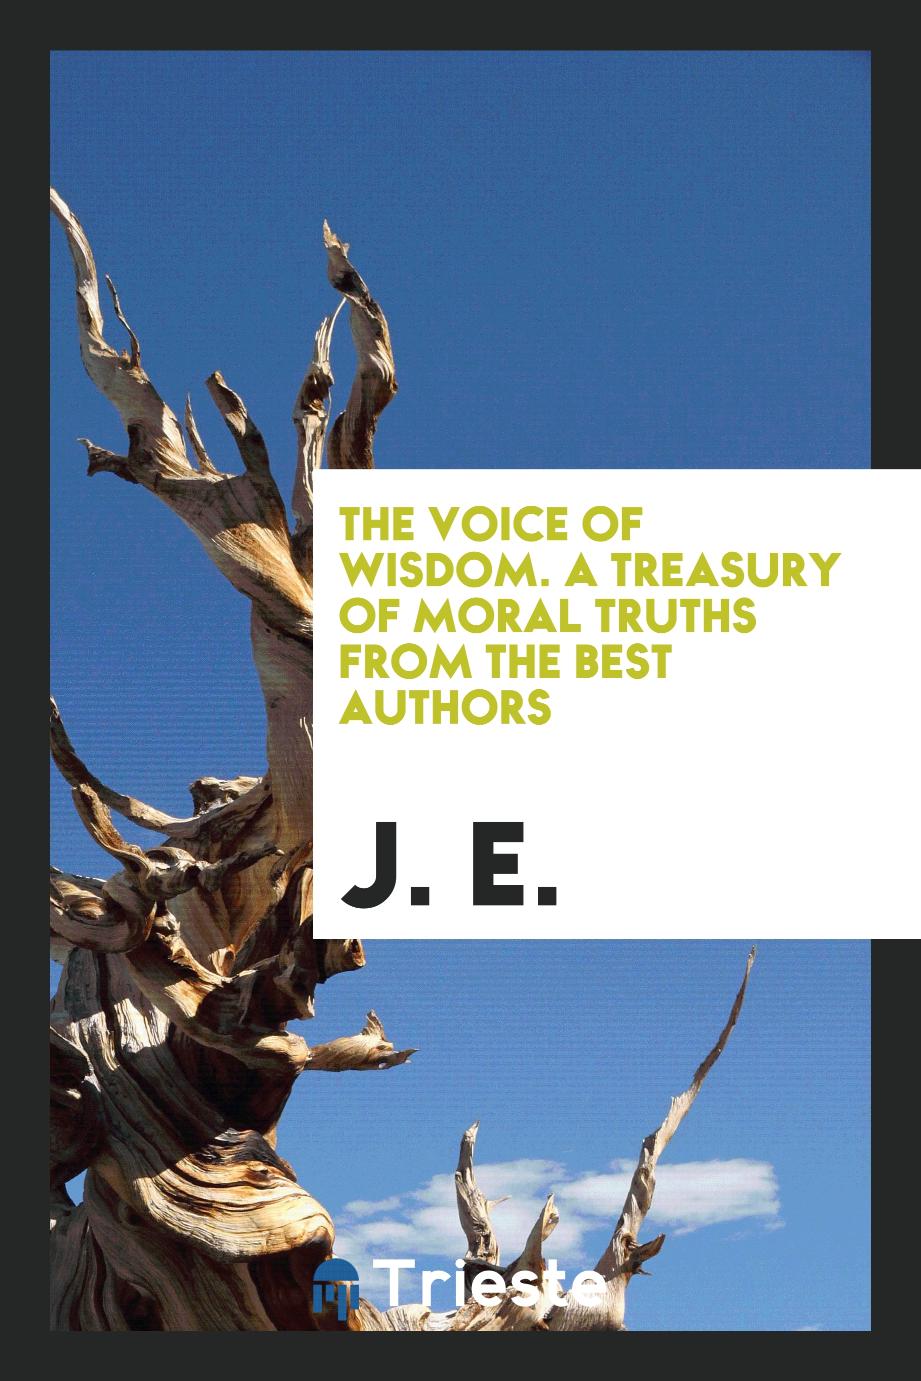 The Voice of Wisdom. A Treasury of Moral Truths from the Best Authors